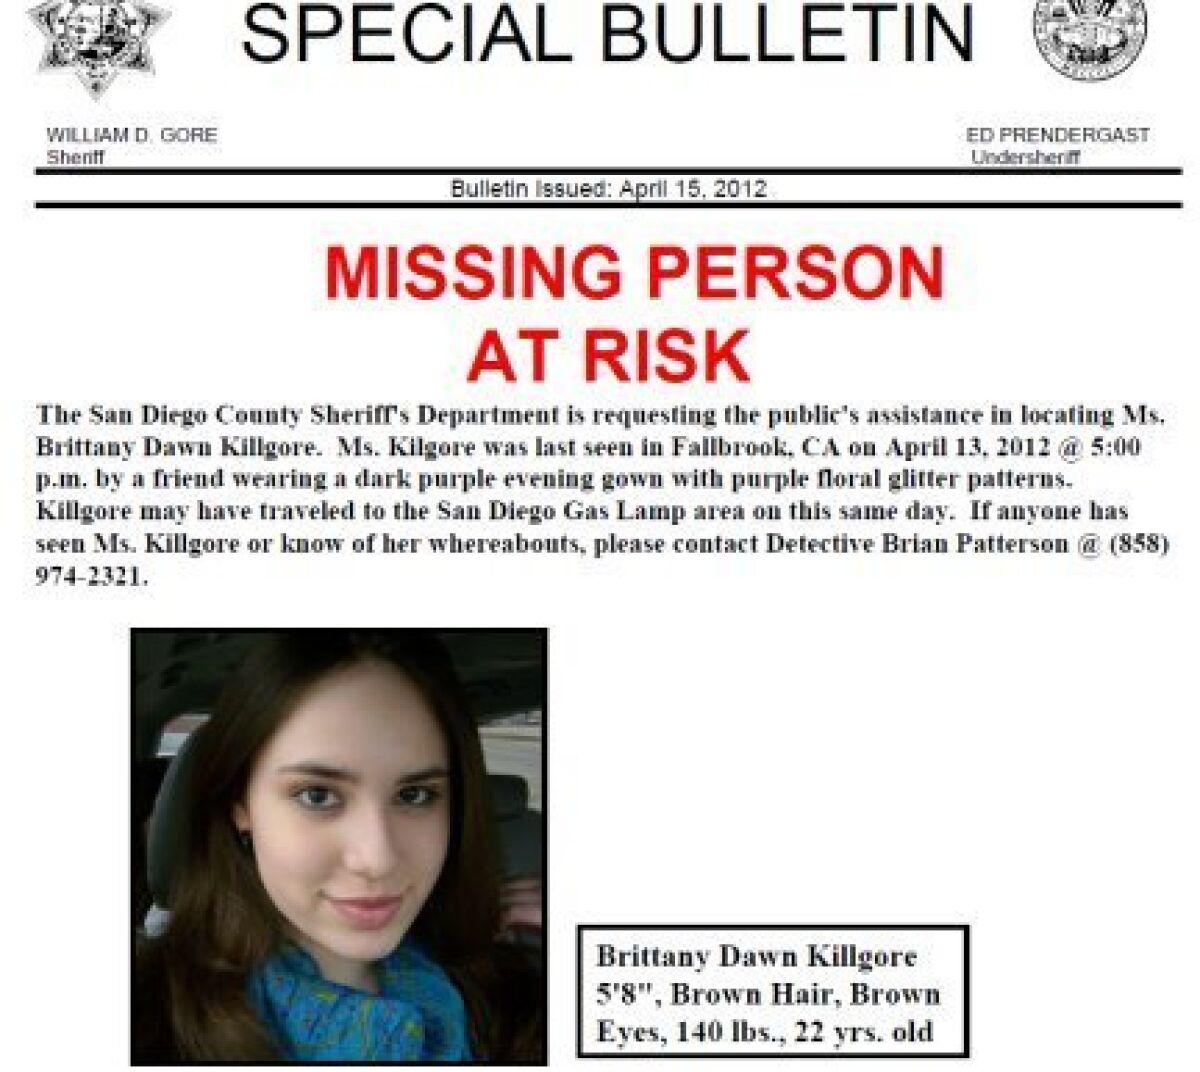 The Sheriff's Department issued a missing person's bulletin for Brittany Killgore on April 15. Her body was found April 17 at Lake Skinner in Riverside County.